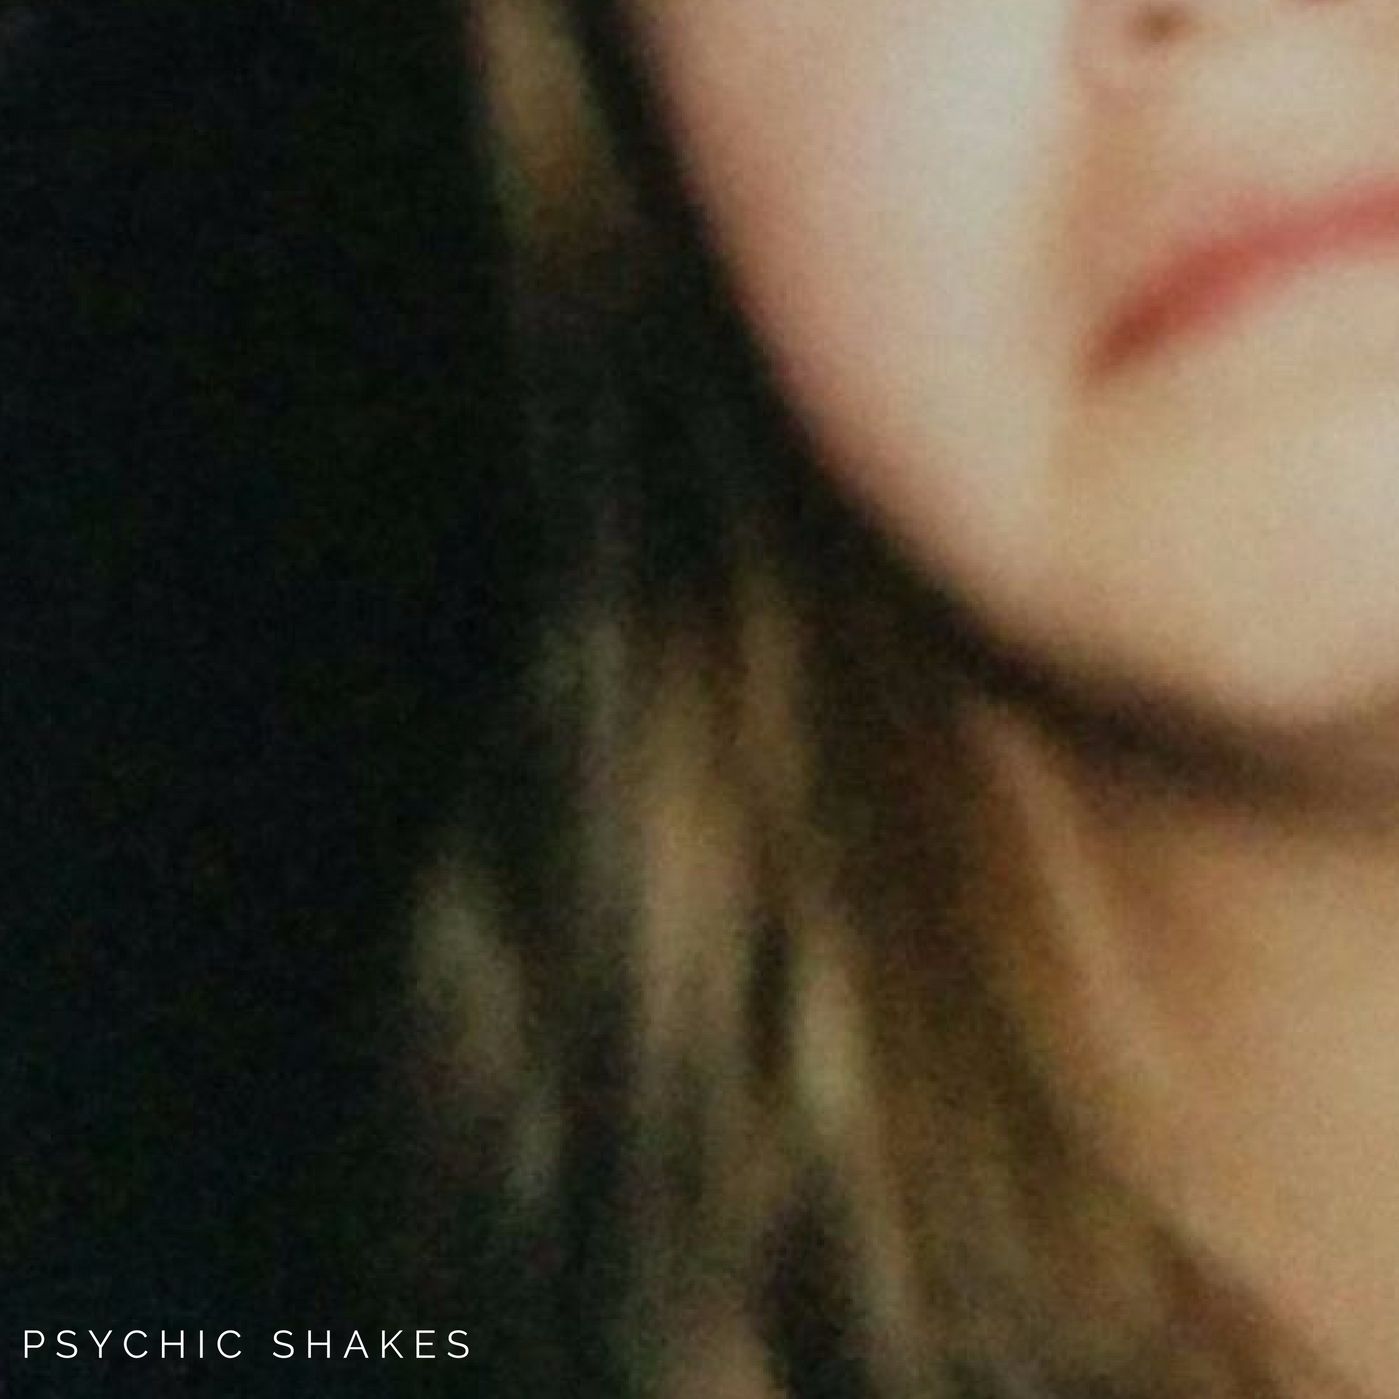 Psychic Shakes – “Wasting Time”